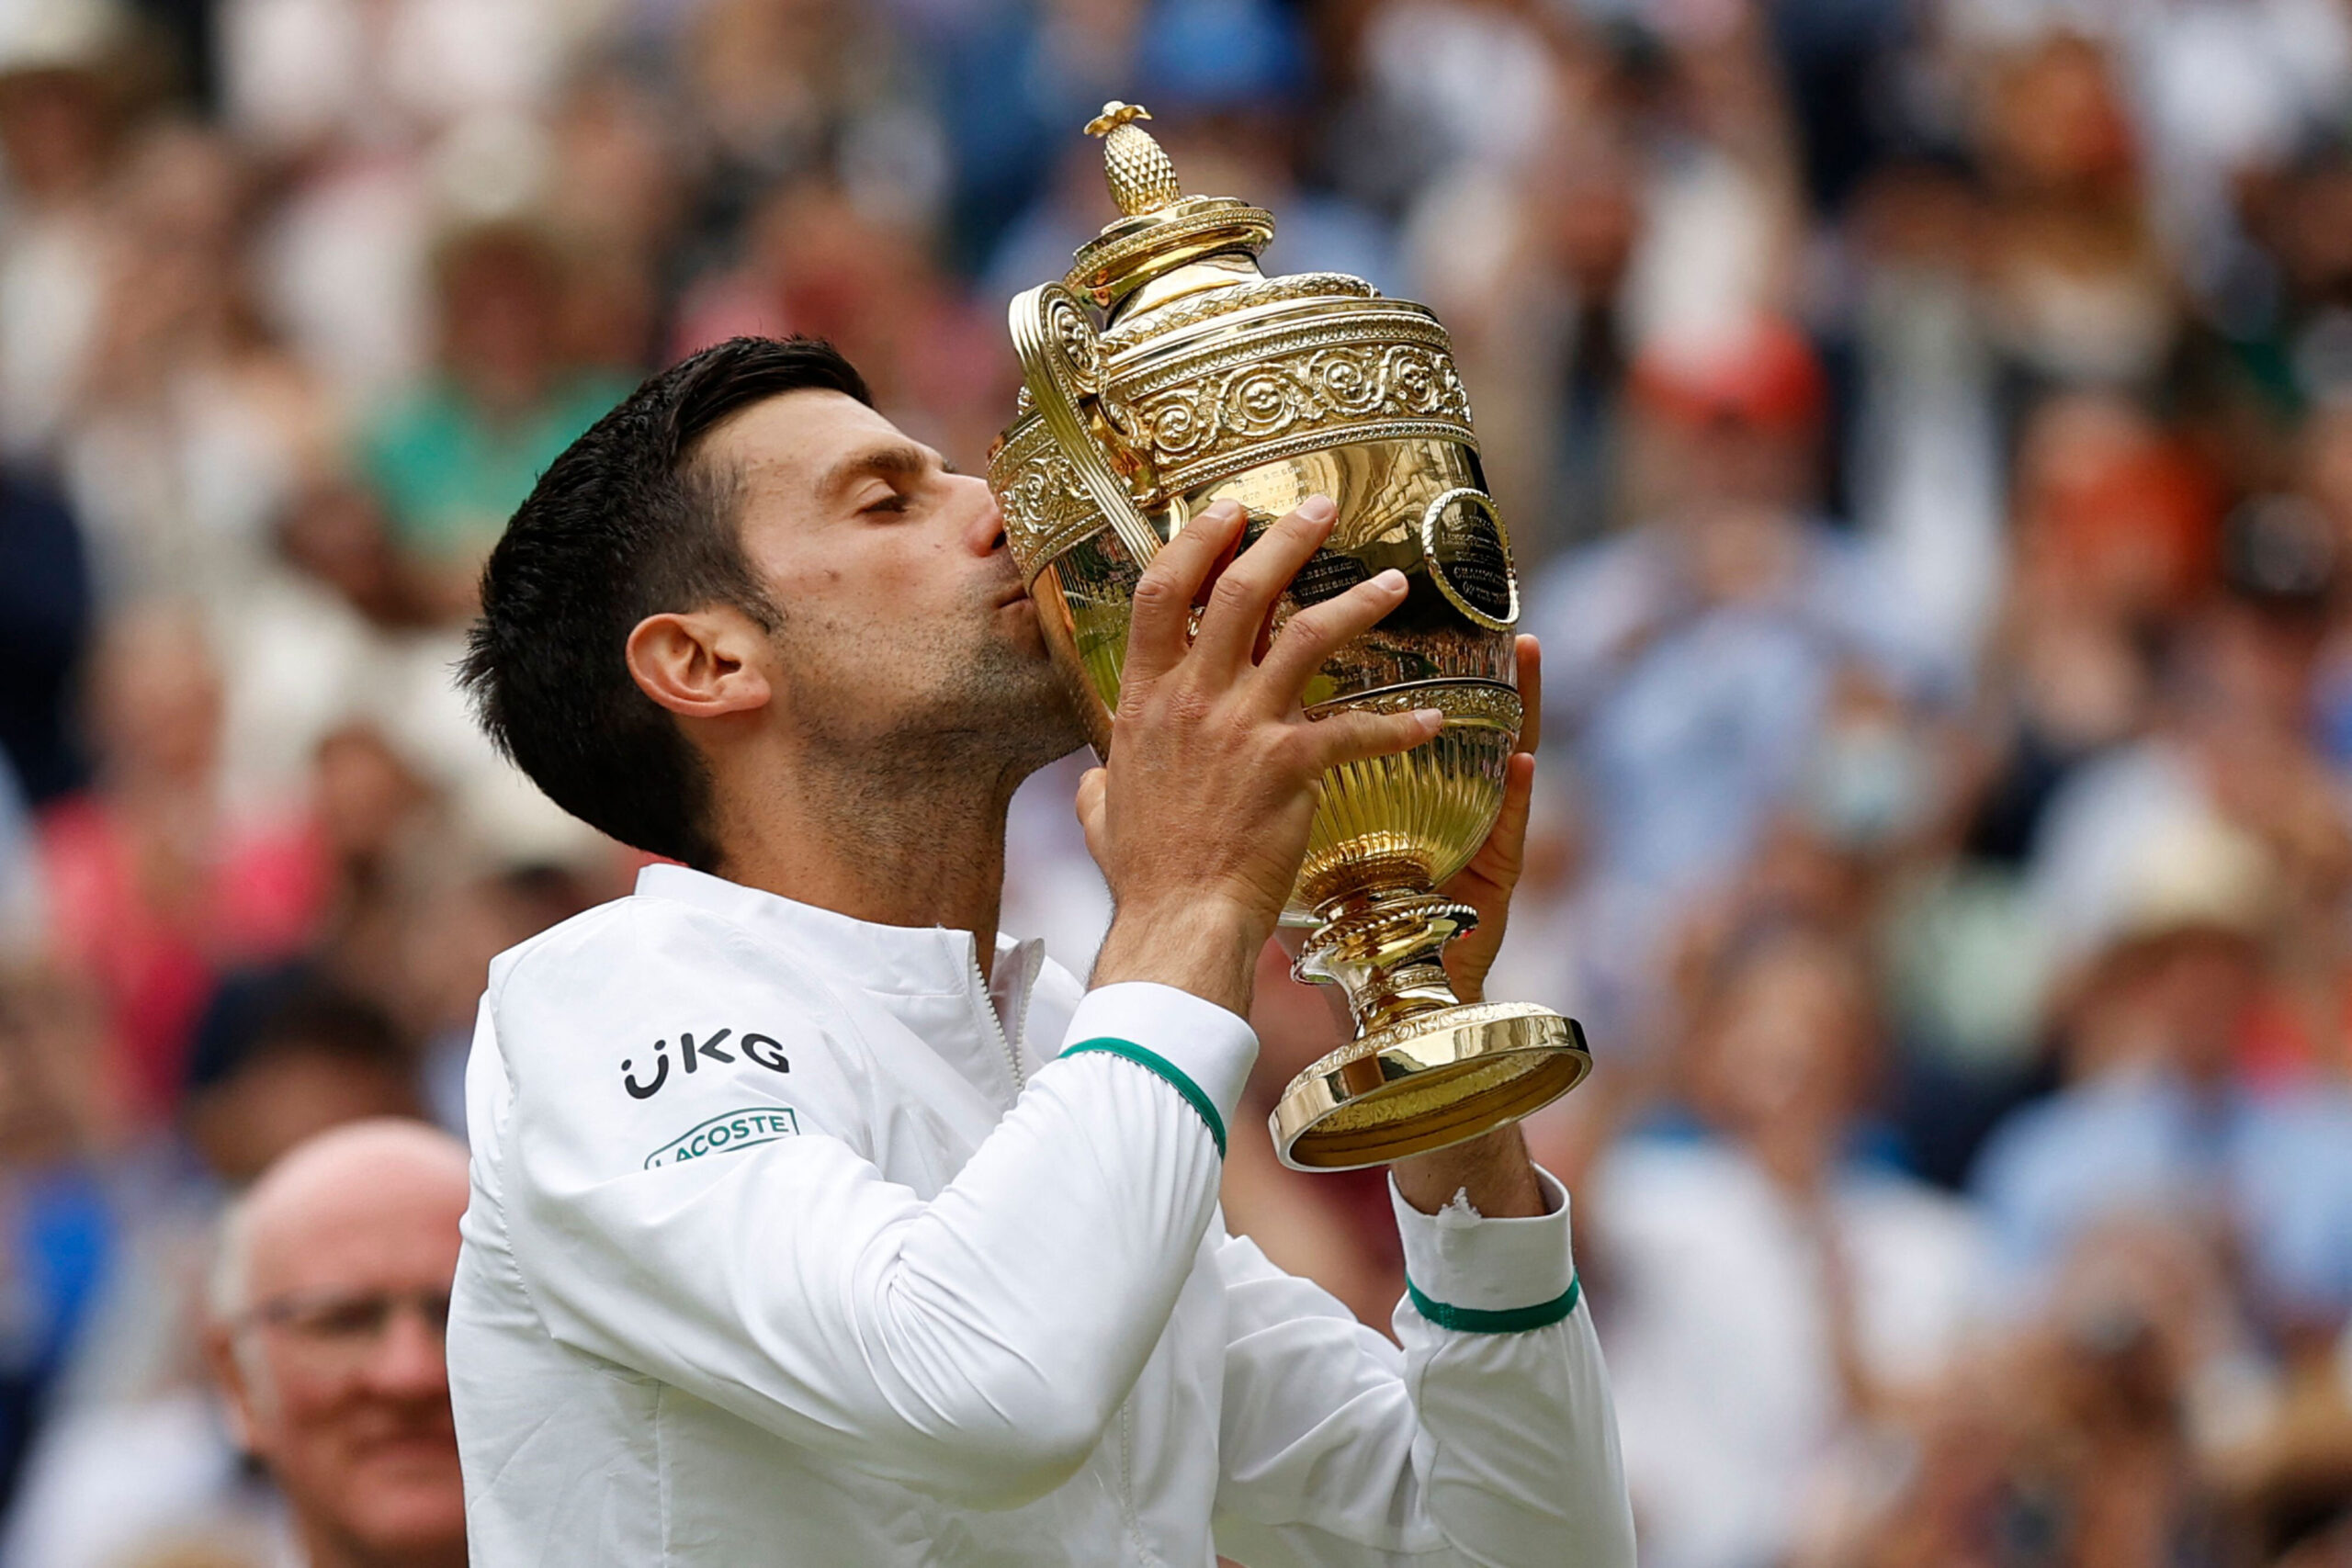 Novak Djokovic to defend Wimbledon title as organizers allow unvaccinated players to compete – KION546